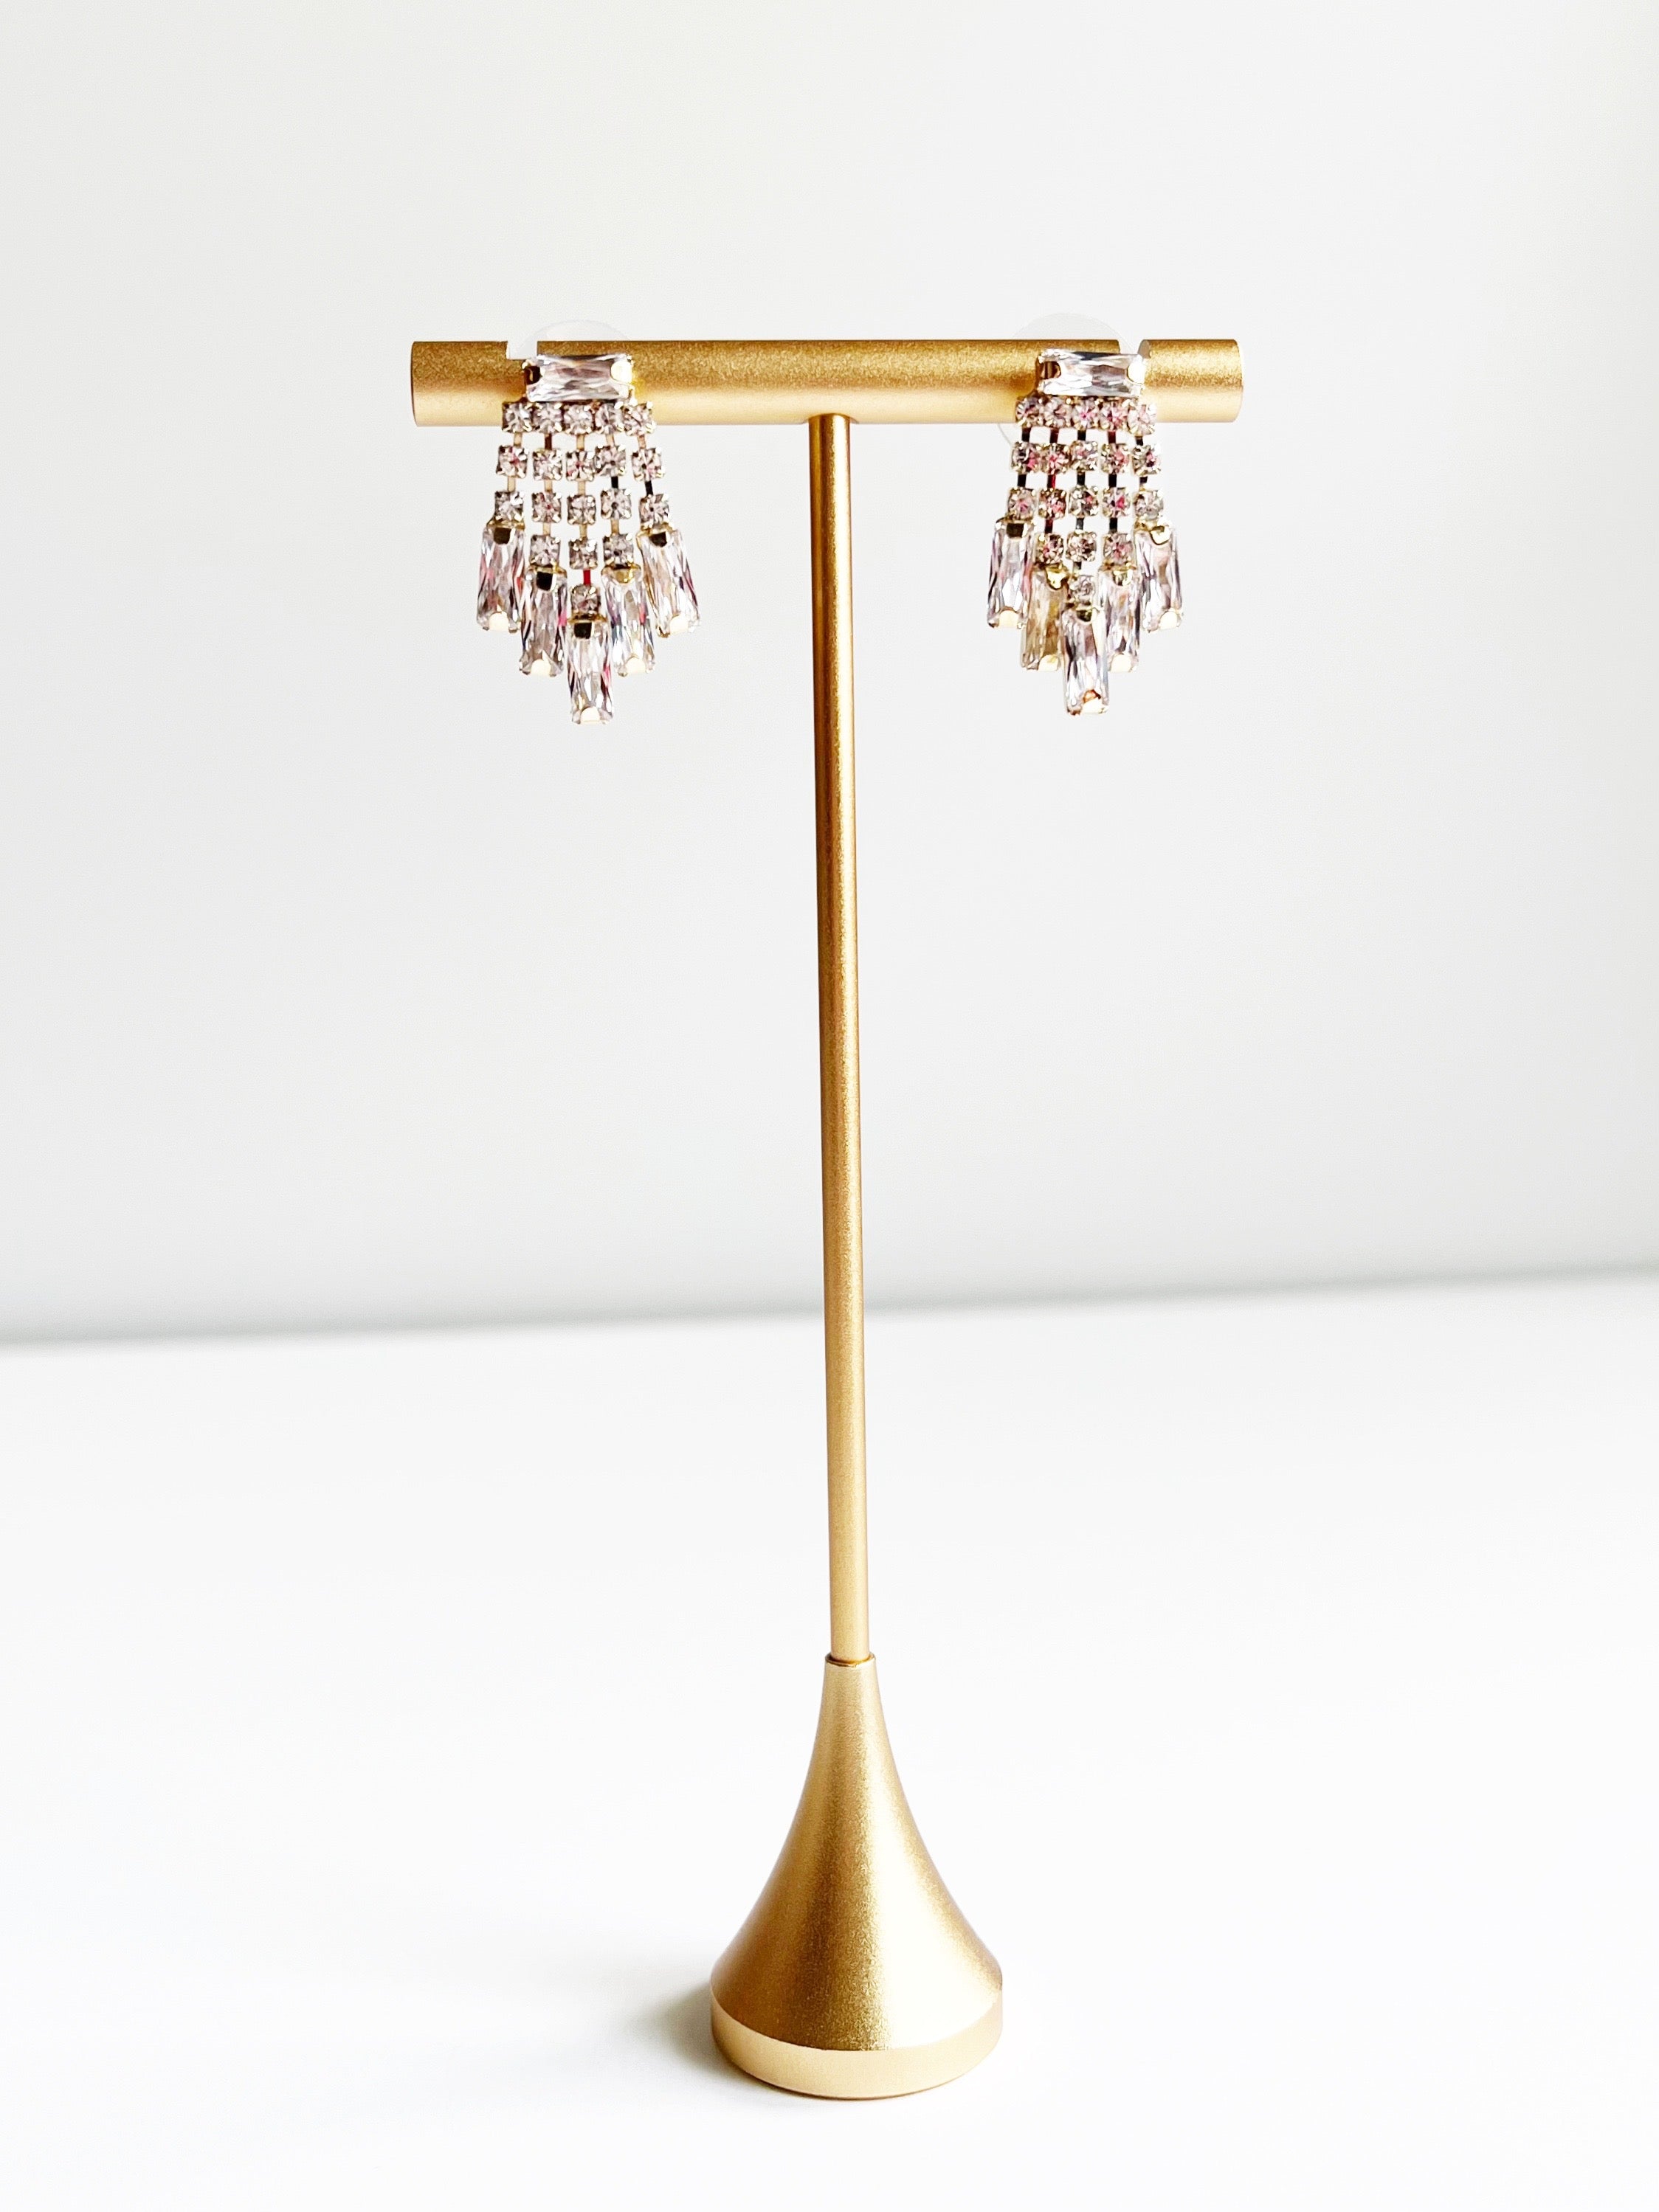 Crystal Earrings displayed on gold jewelry tstand